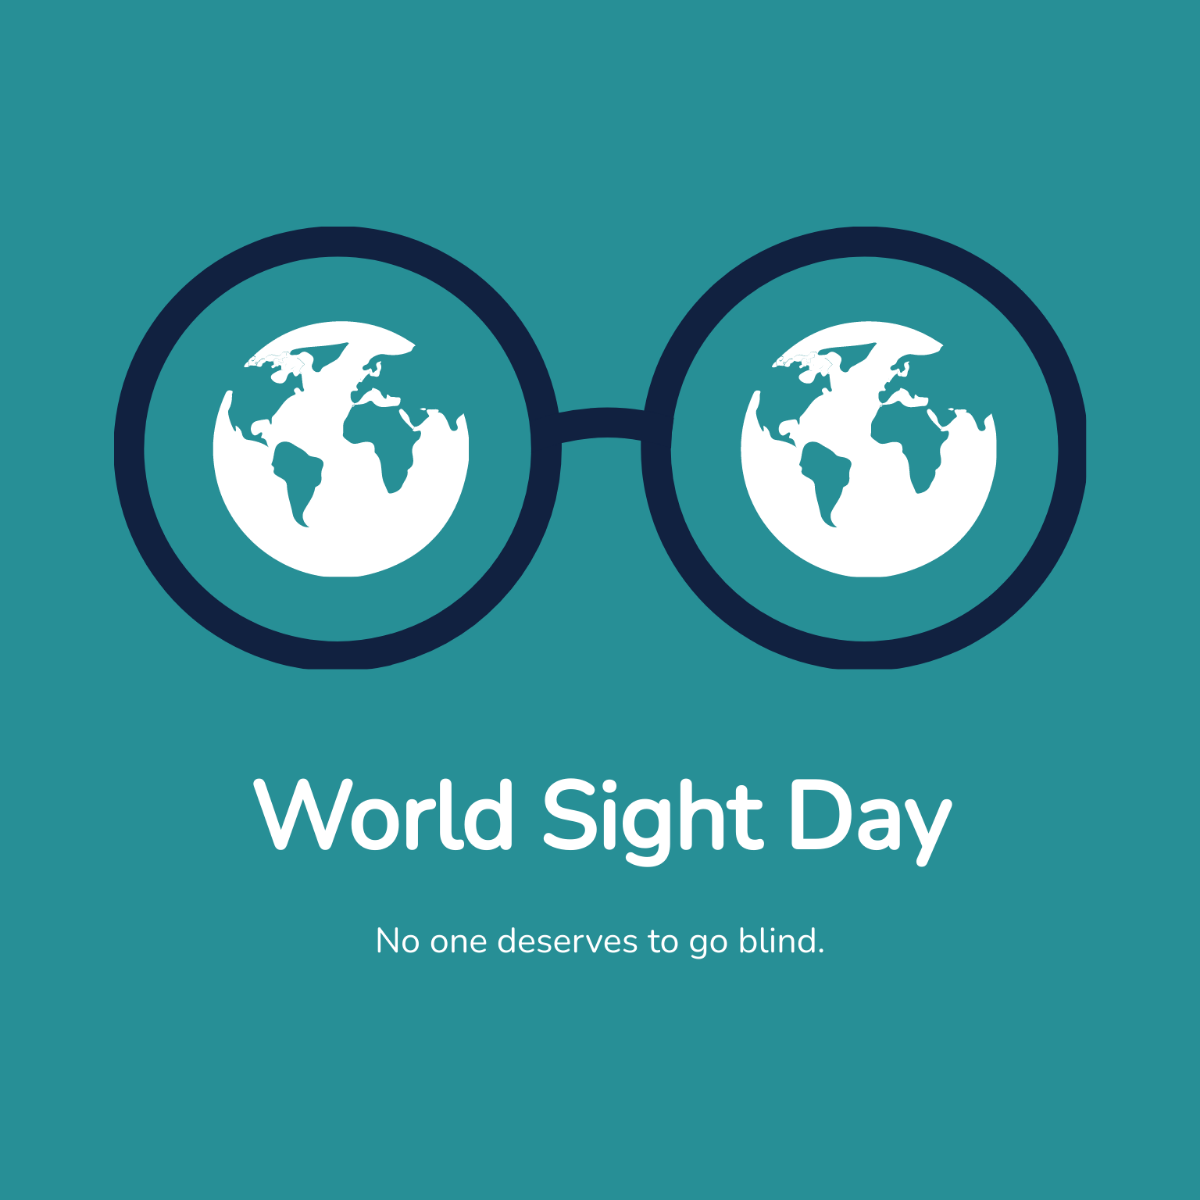 Free World Sight Day Flyer Vector Template